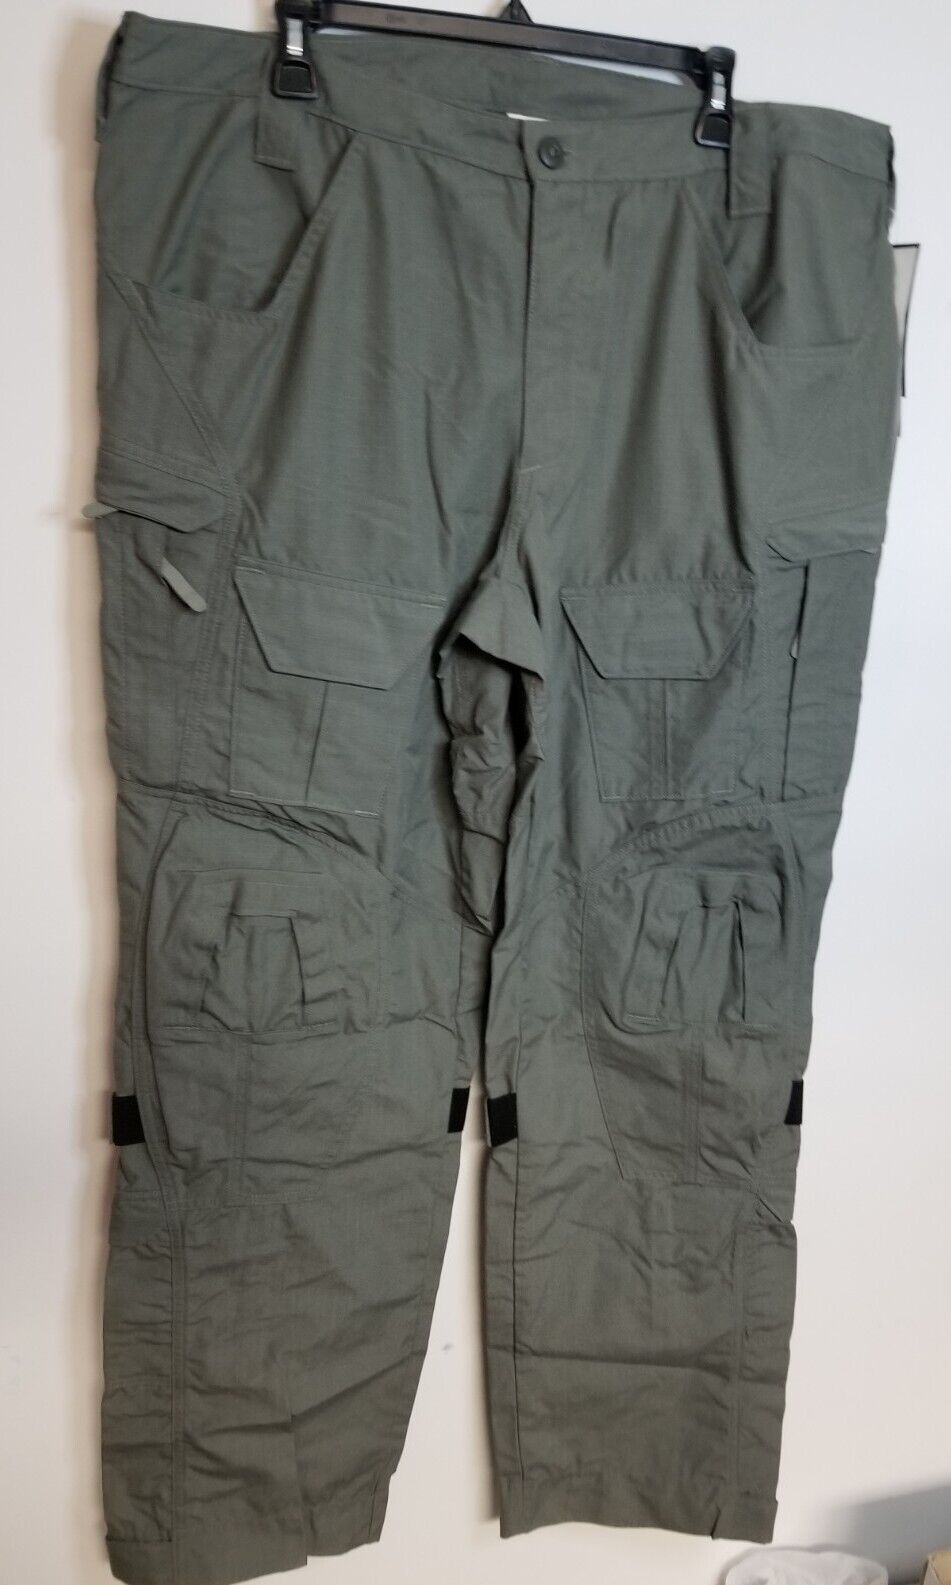 NWT Massif Hellman Combat Pants Flame Resistant FR Trousers 2XL Gray 